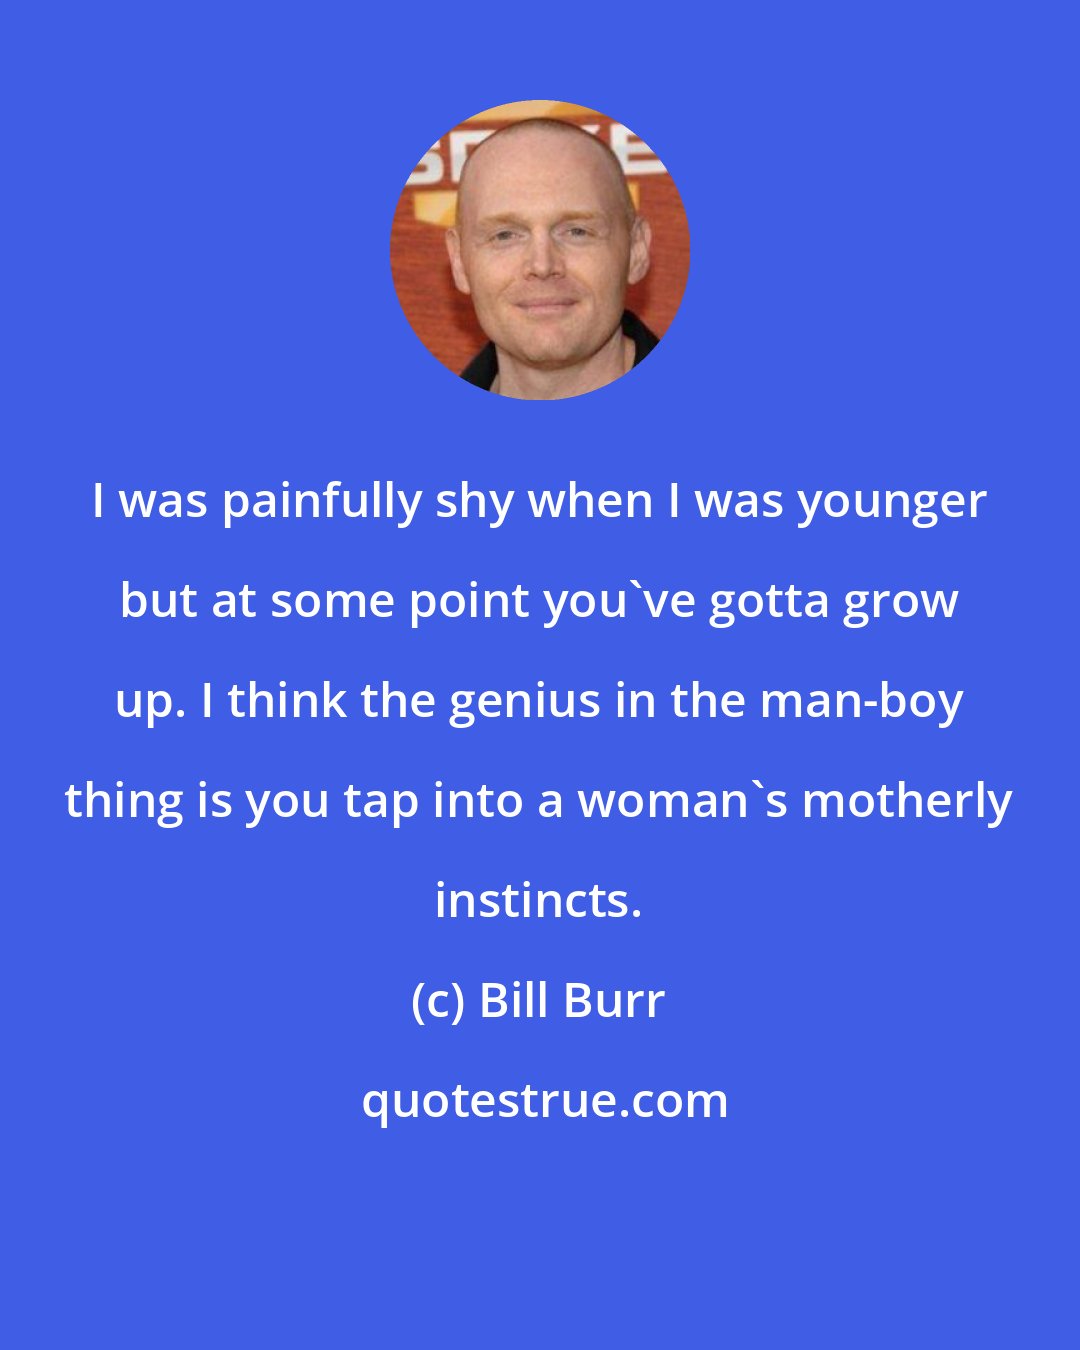 Bill Burr: I was painfully shy when I was younger but at some point you've gotta grow up. I think the genius in the man-boy thing is you tap into a woman's motherly instincts.